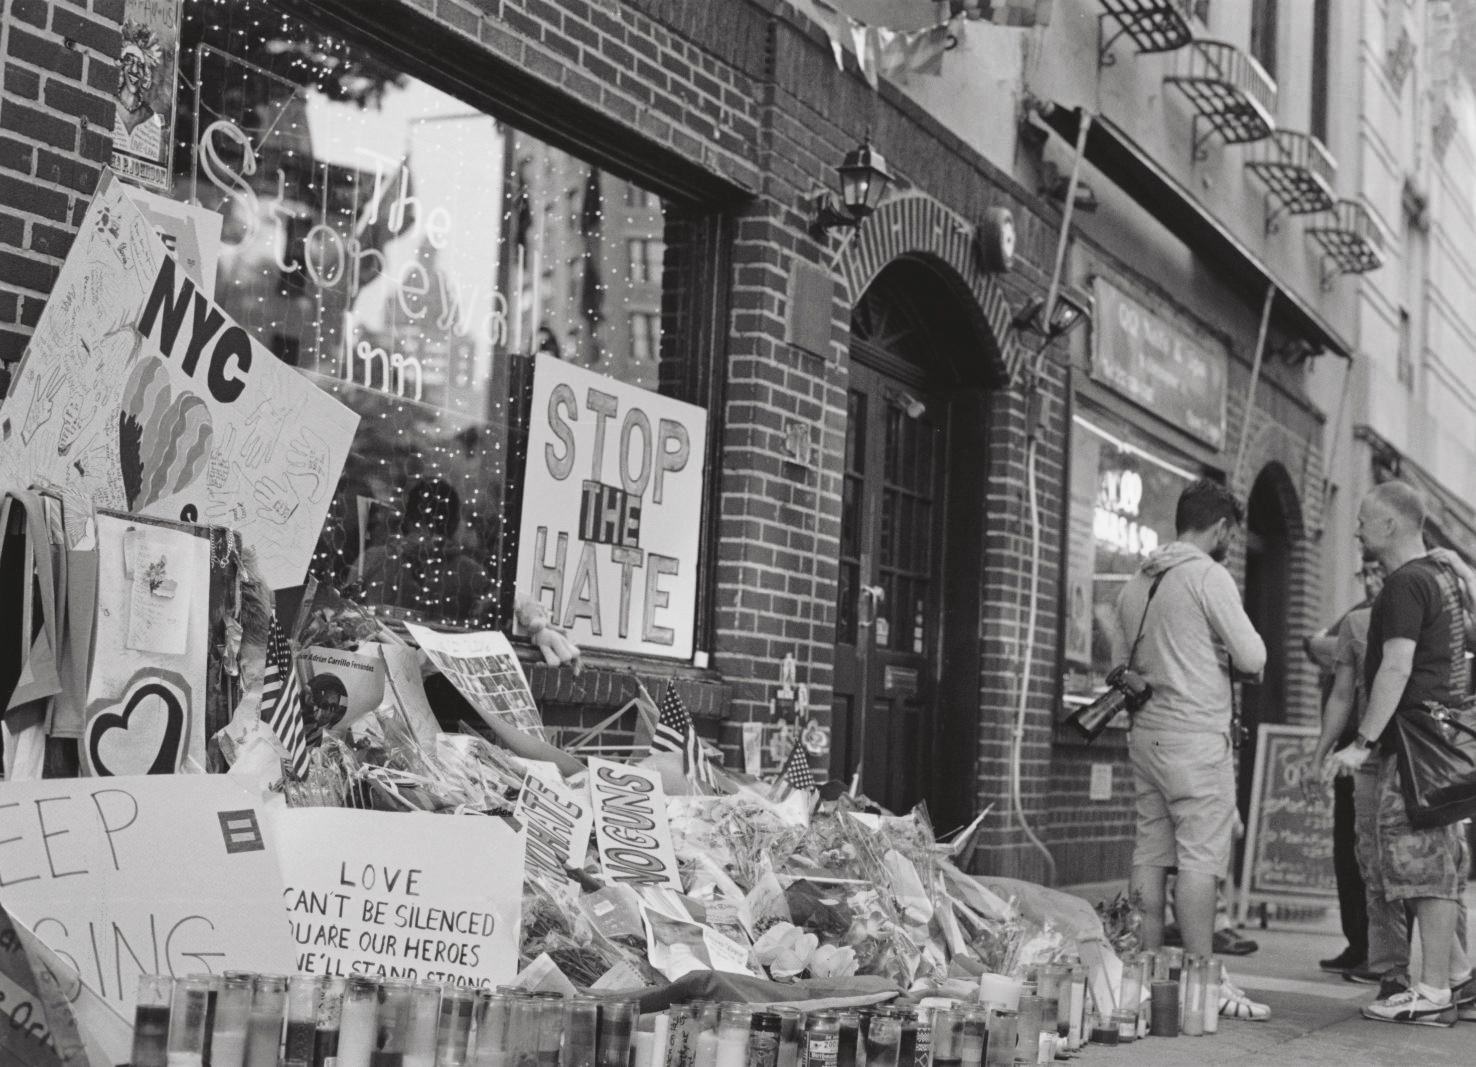 I Ran to Stonewall Inn After The Orlando Shooting